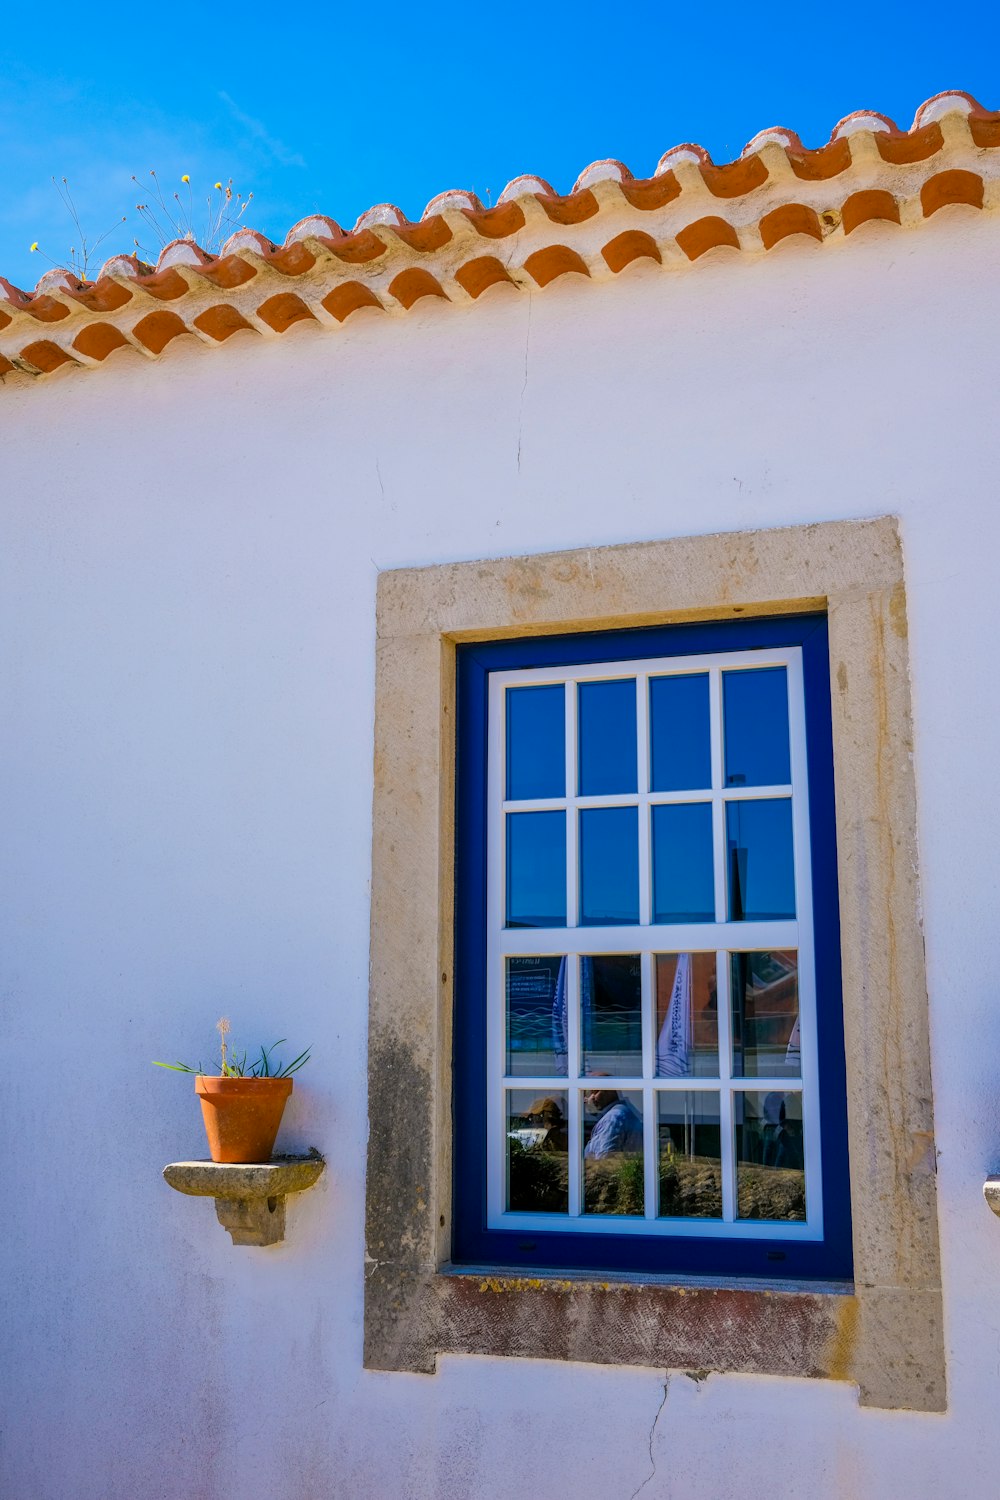 a window with a blue pane and a potted plant